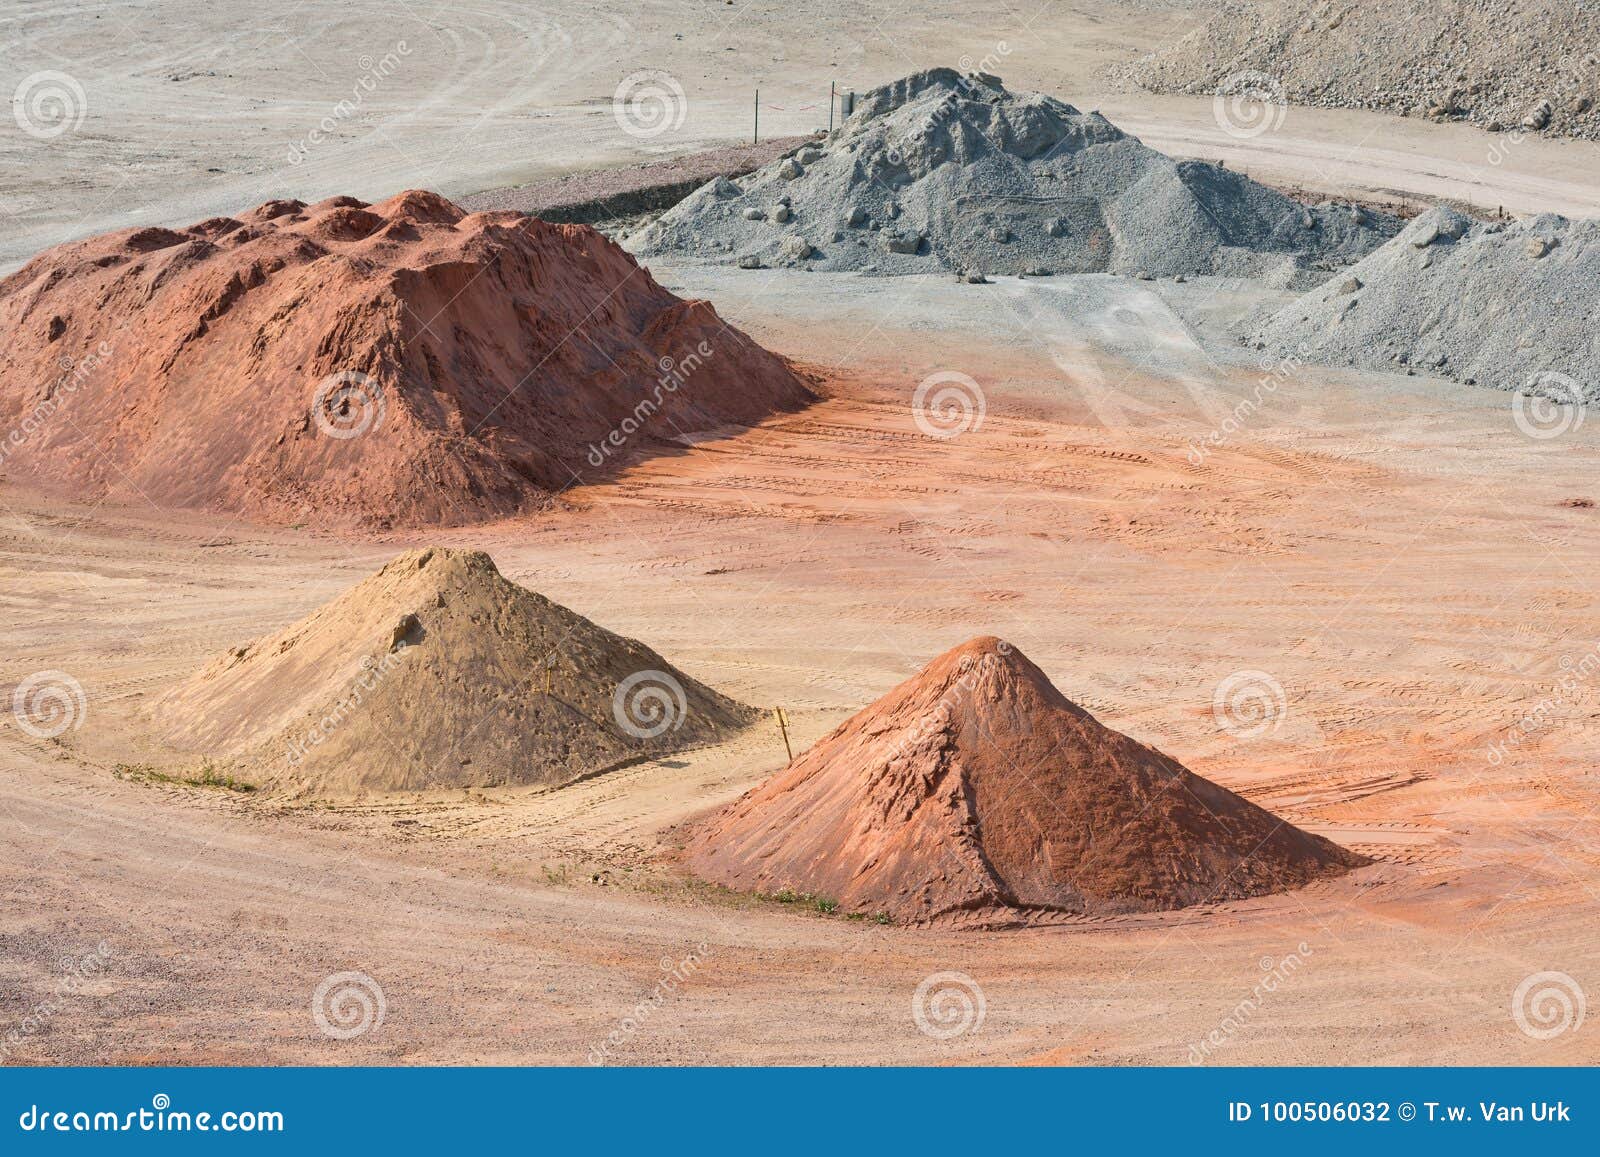 stockyard of sands, pebbles and aggregates near le havre, france